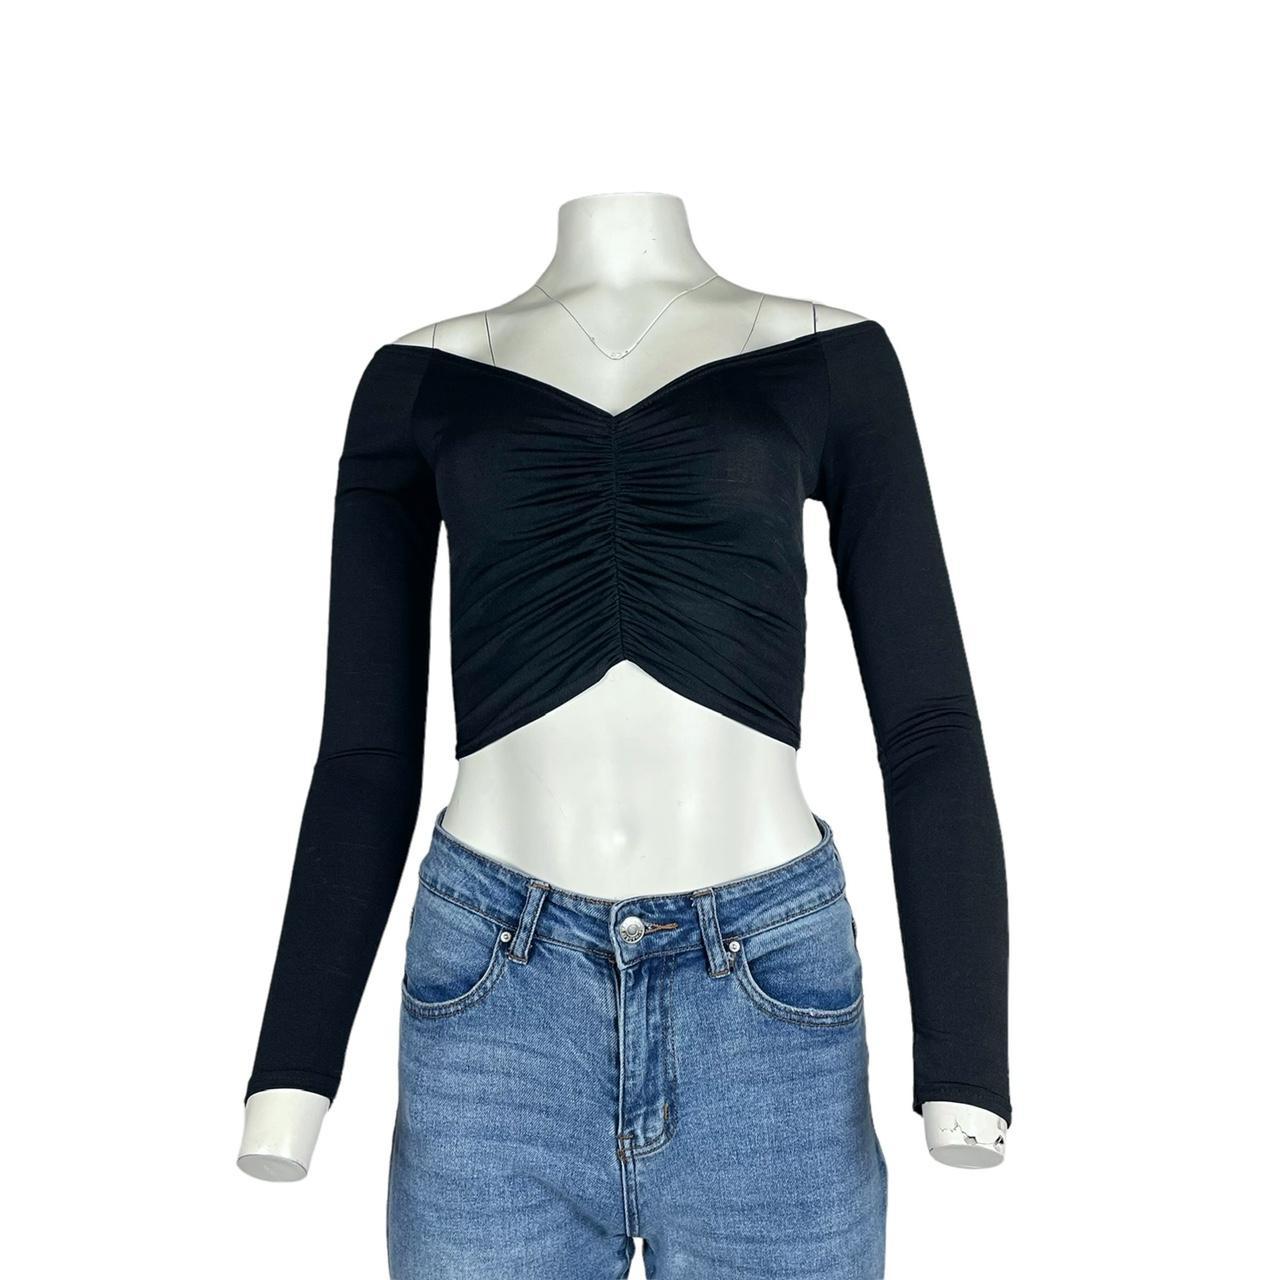 Product Image 1 - PrettyLittleThing Shirred Crop Top Black